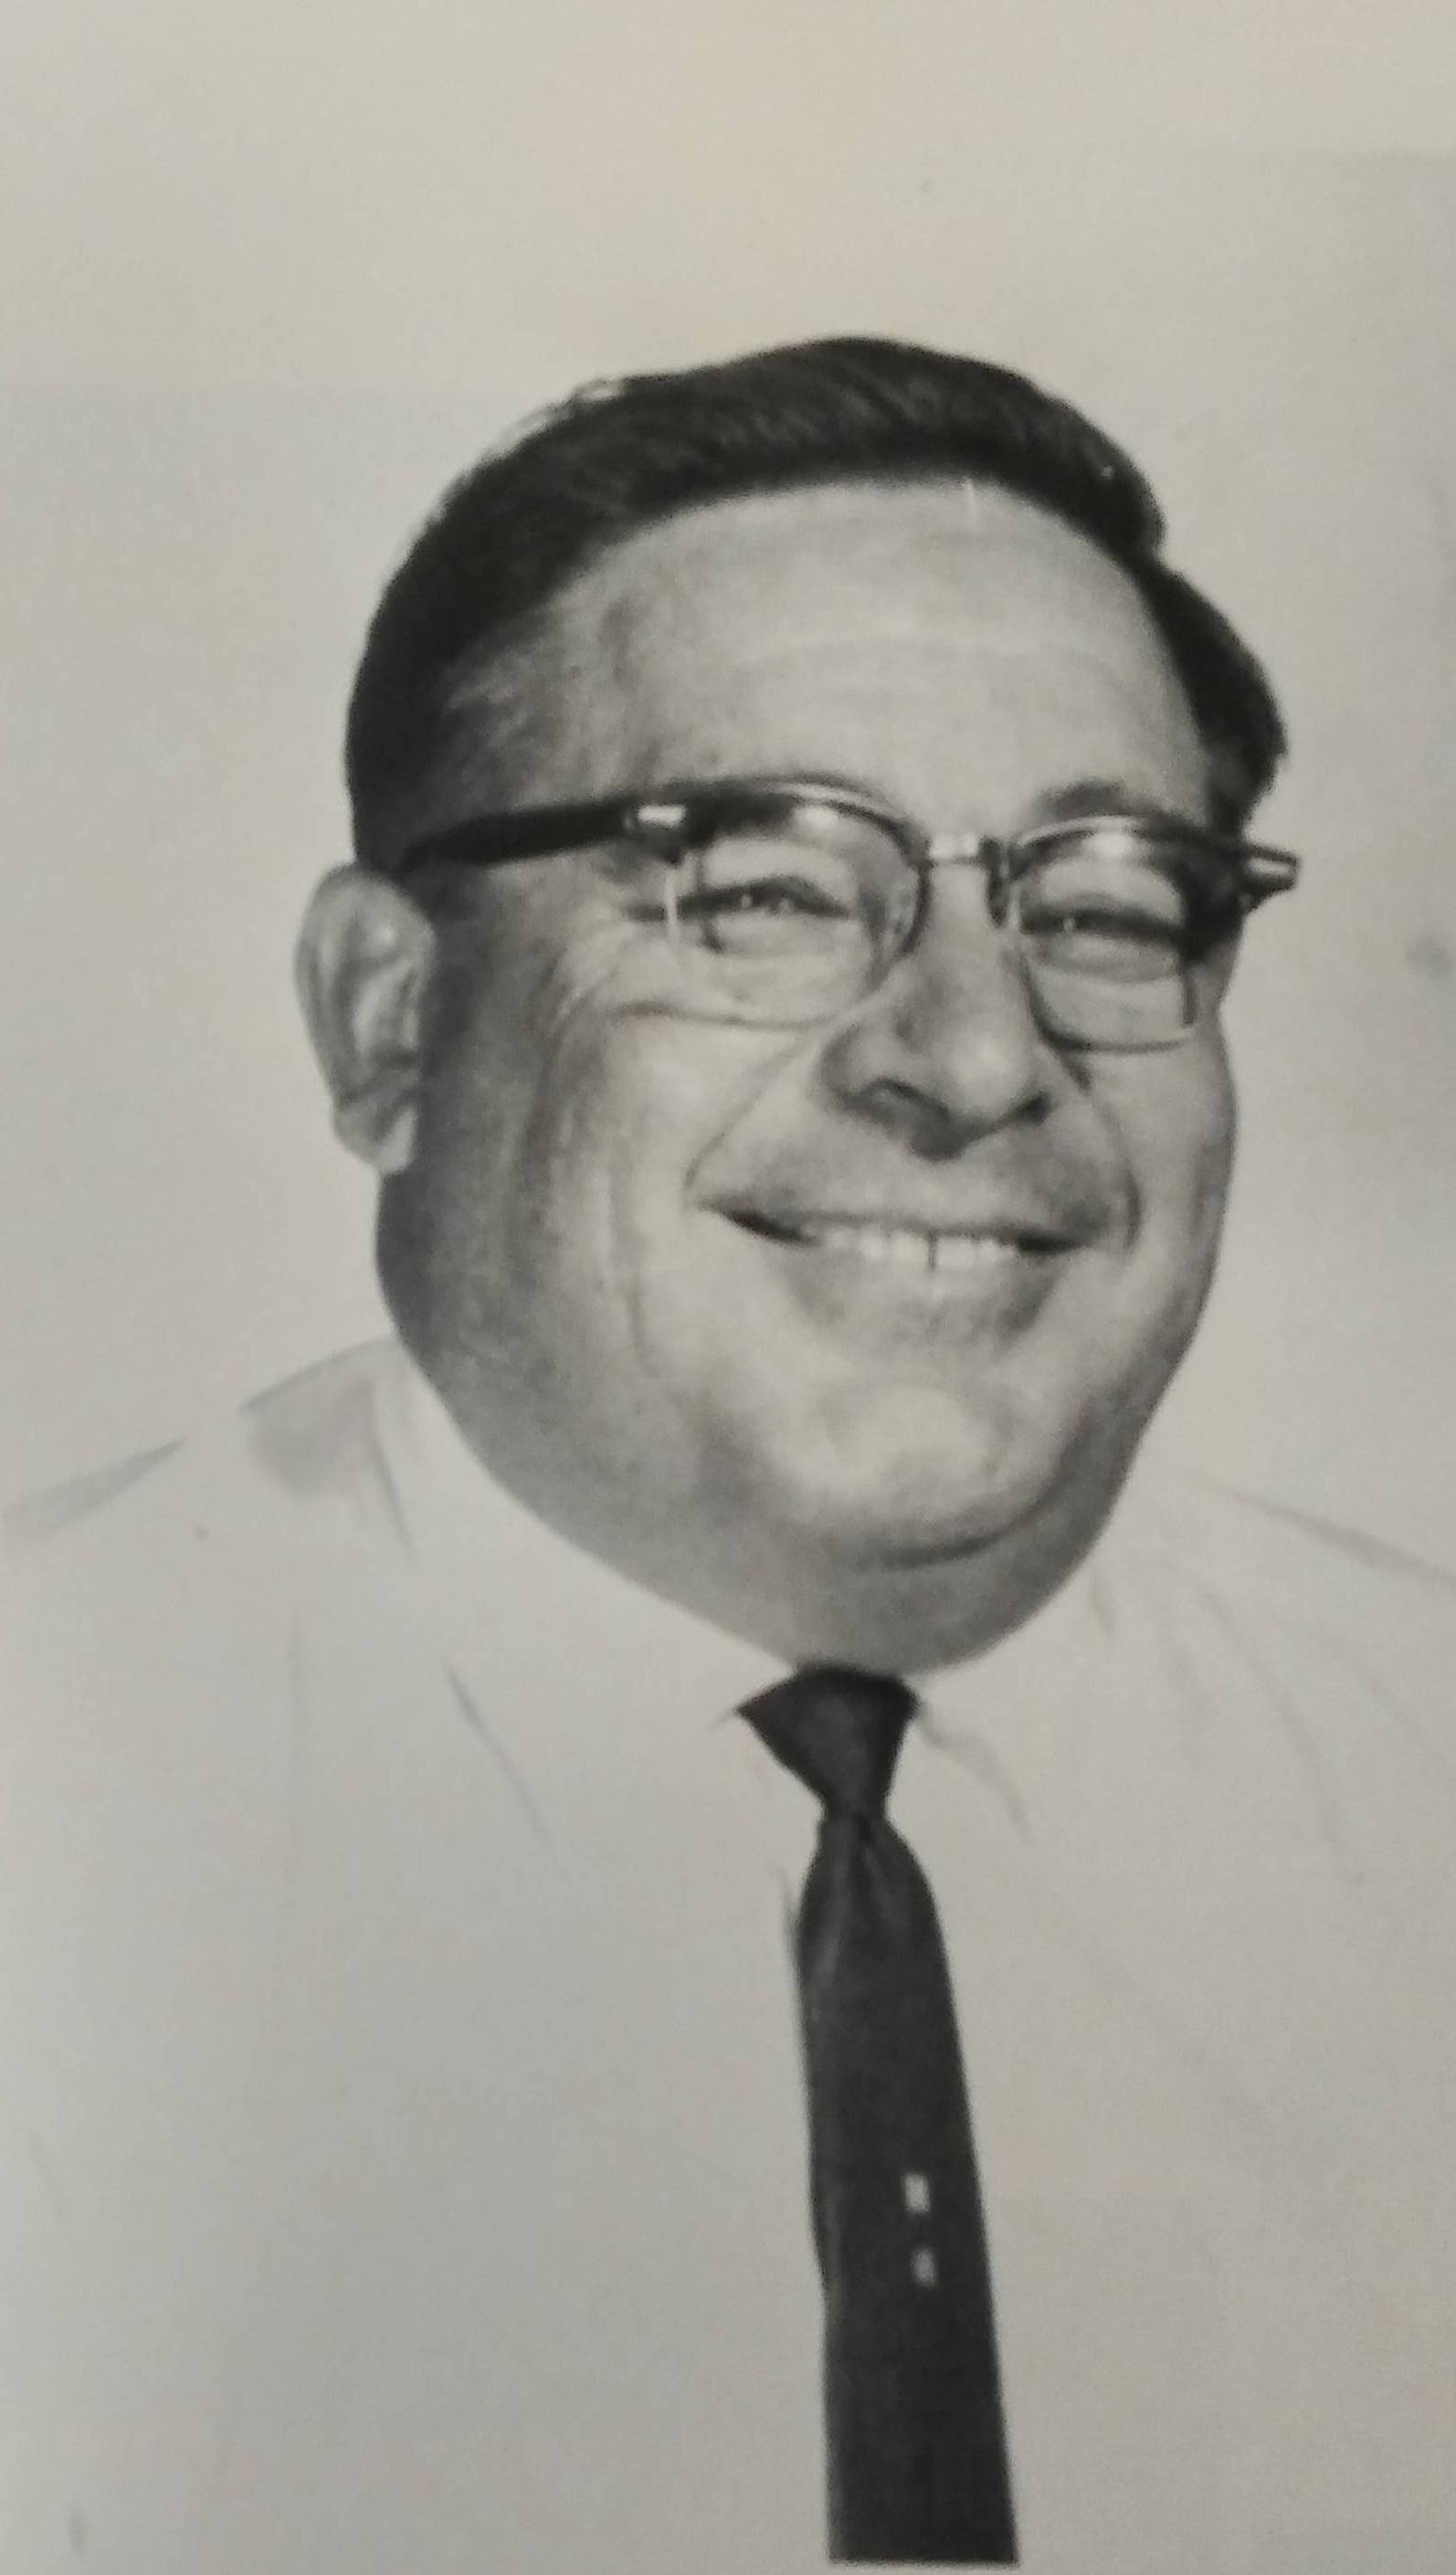 Picture of Carl P. Kusick approximately 1970.